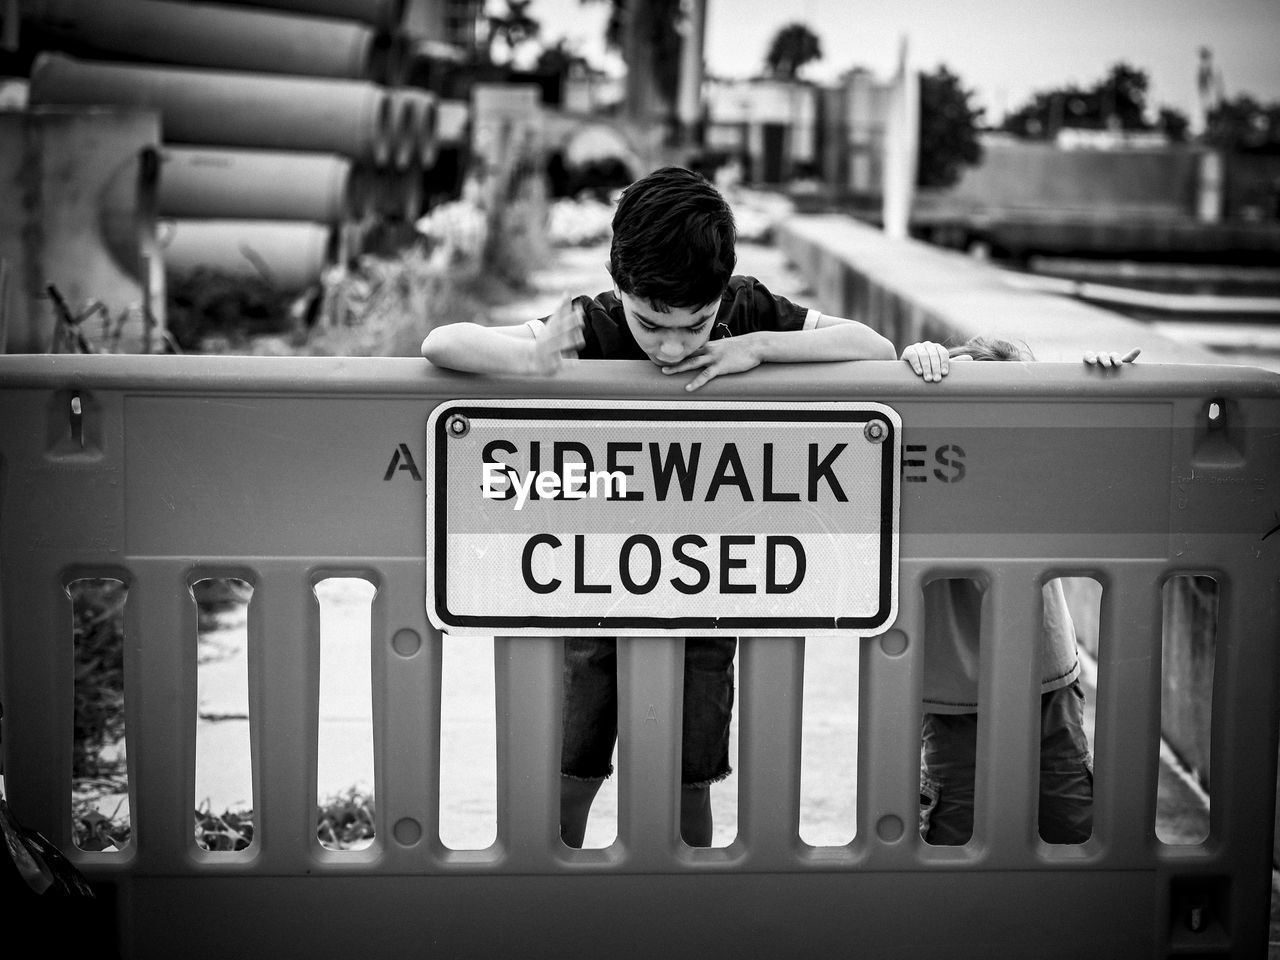 Boy standing behind sidewalk closed construction site sign